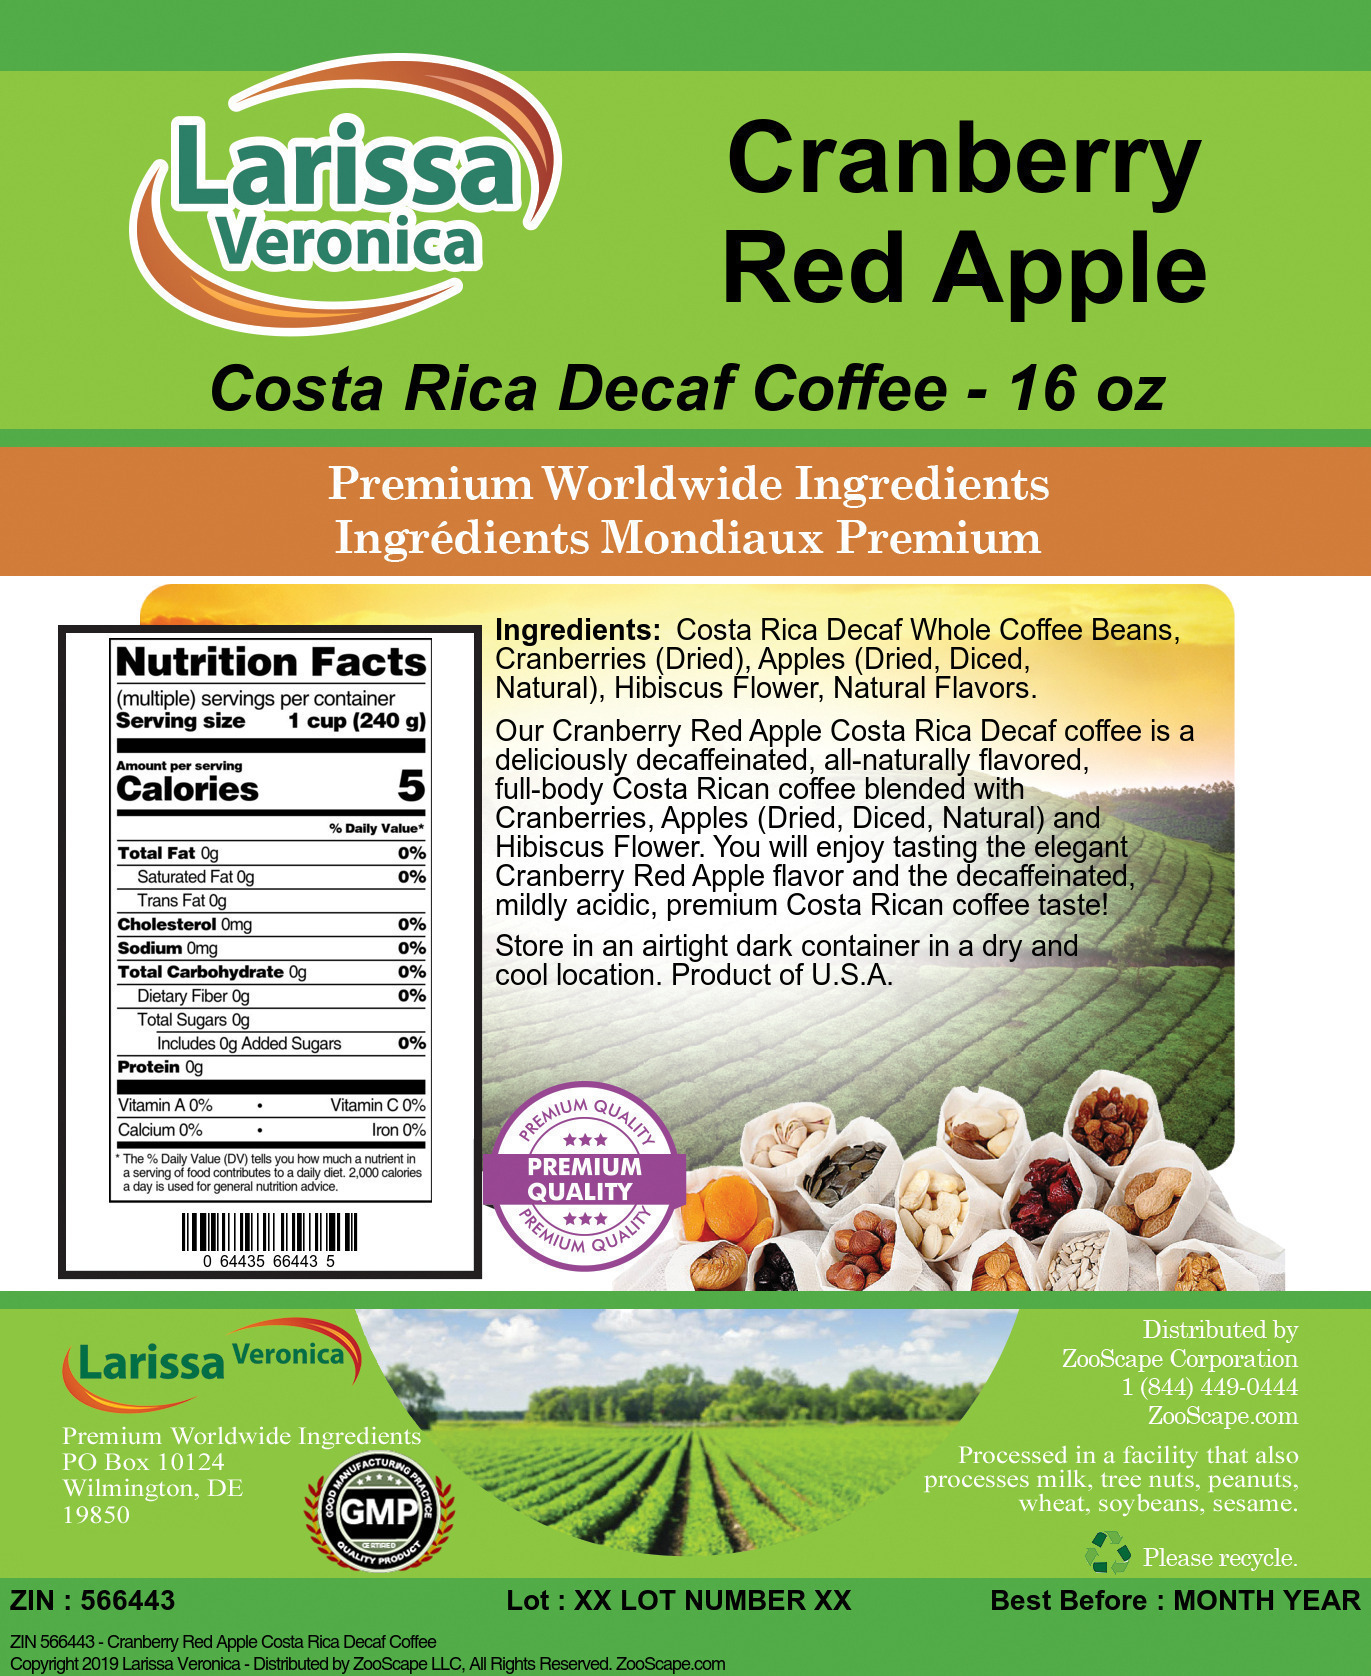 Cranberry Red Apple Costa Rica Decaf Coffee - Label